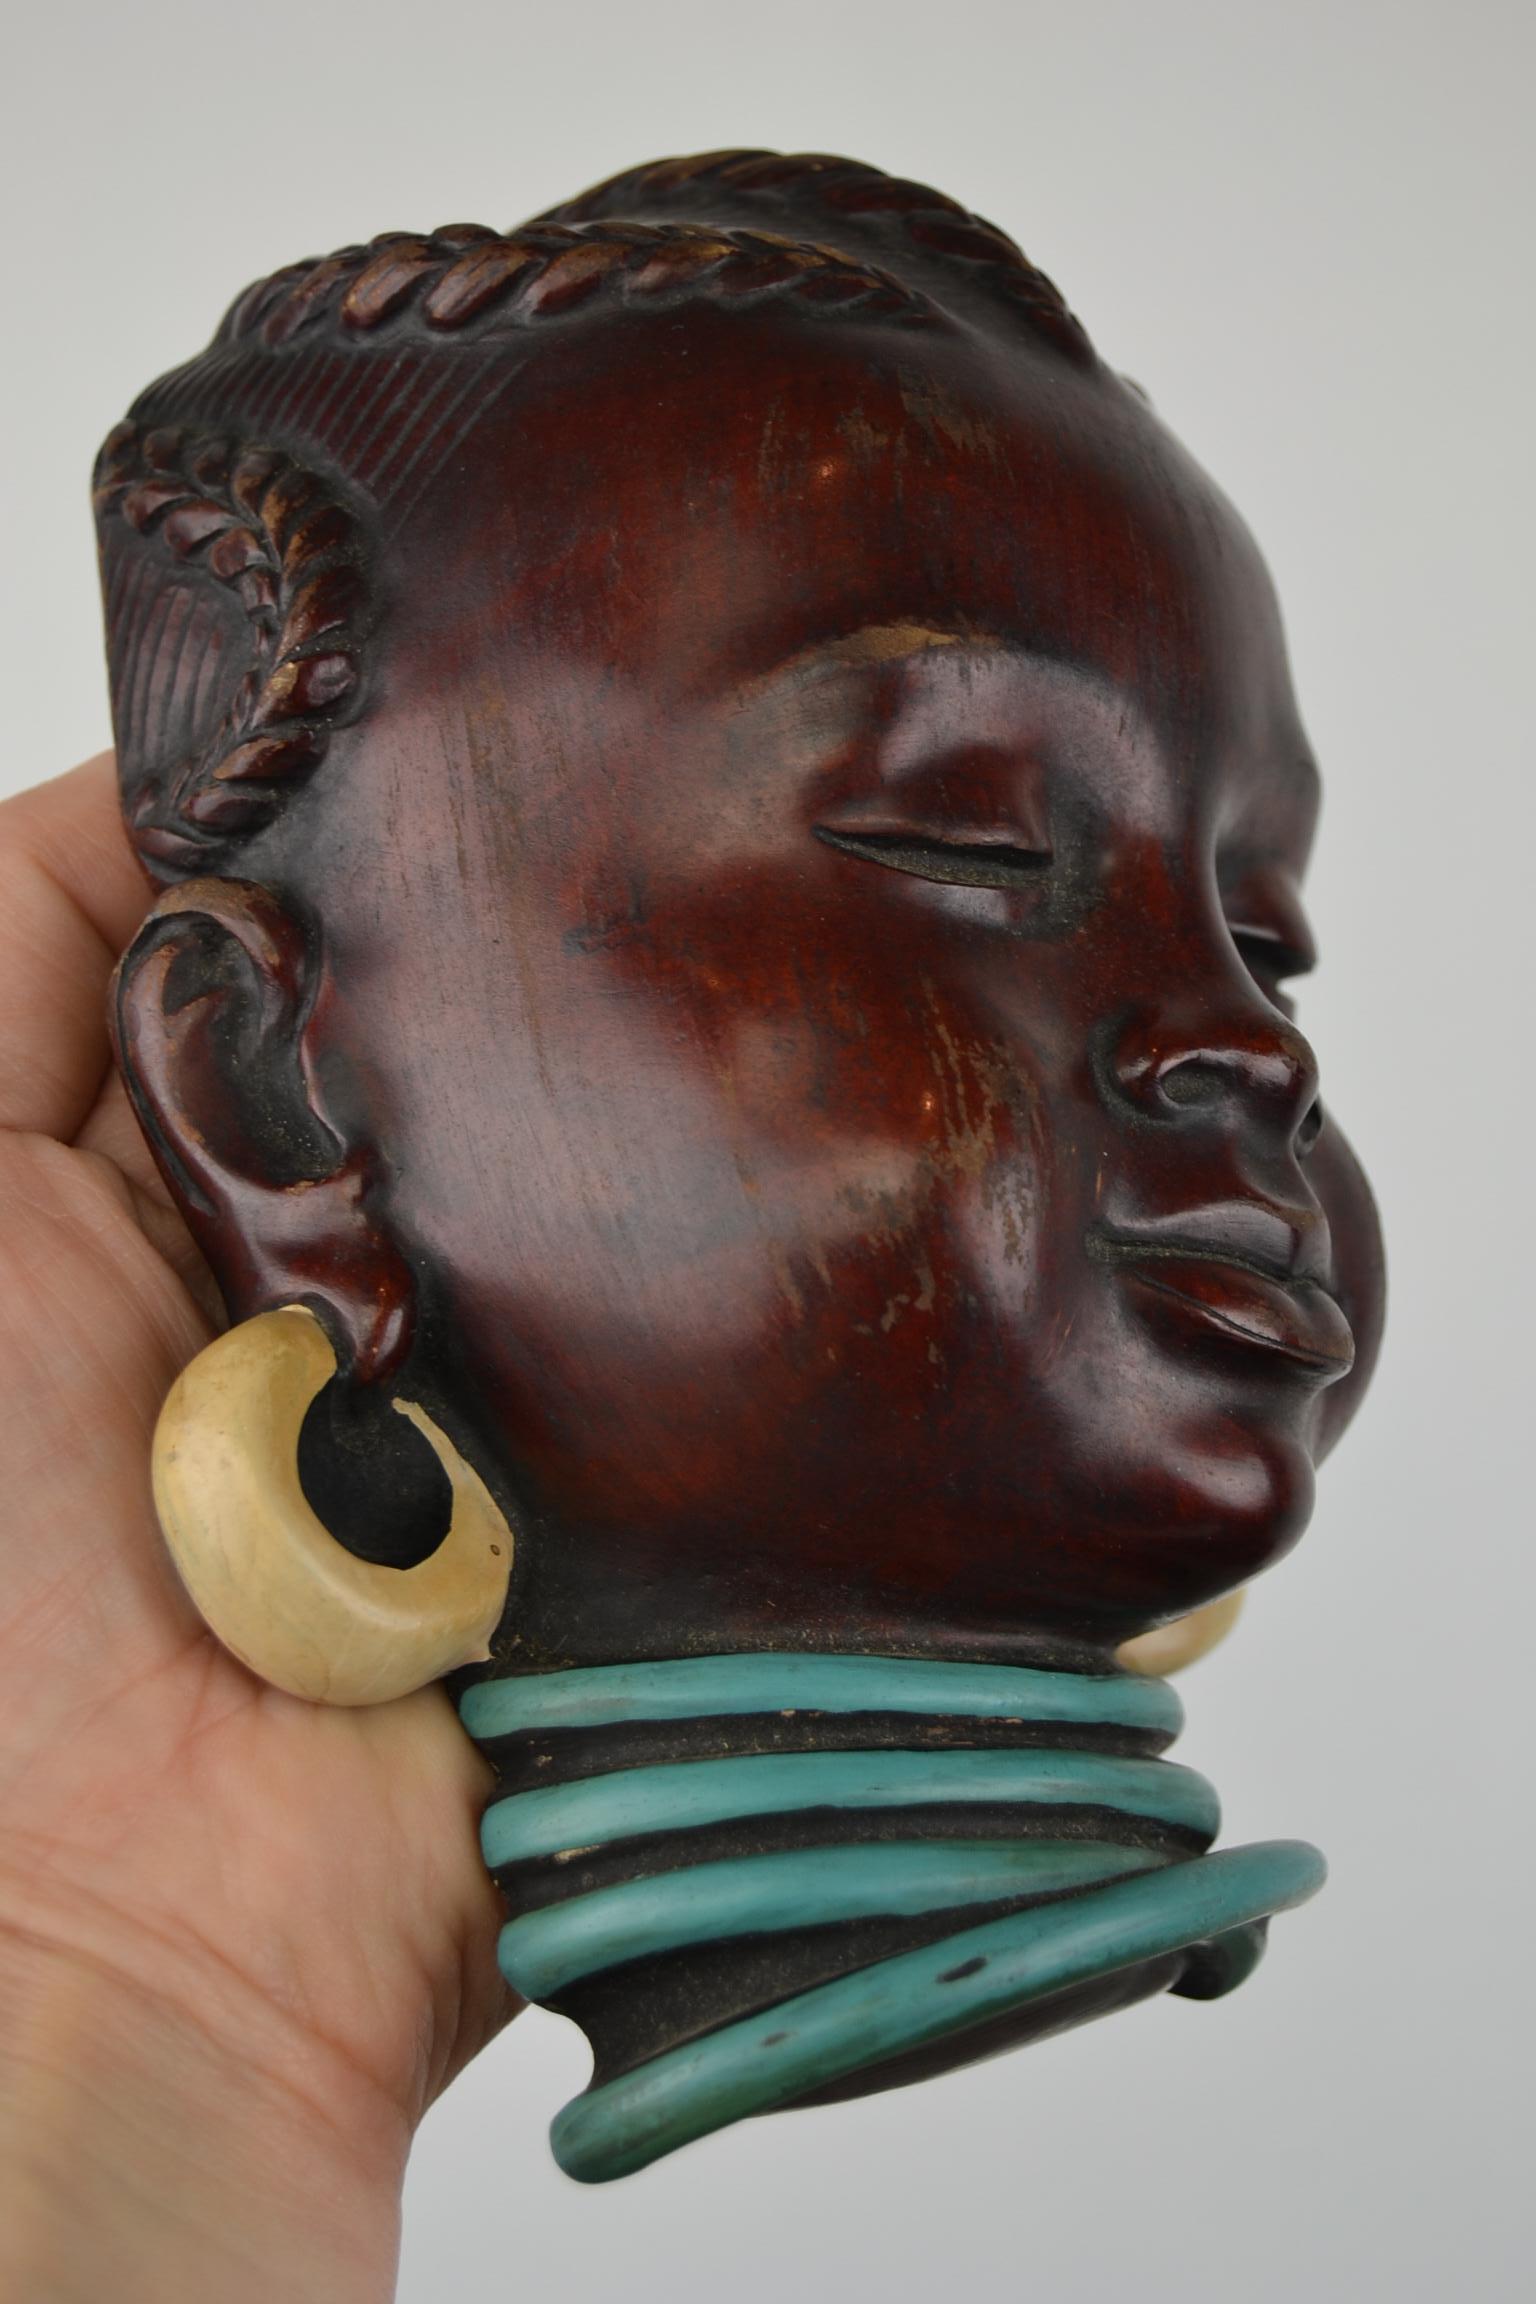 Vintage Afro Child , Afro Woman Wall Mask which looks great.
This wall head decoration is very detailed and was made in Germany.
This German pottery mask dates circa 1950-1960.
It's made from a special mix of Grindet stone and wood with binder,
and